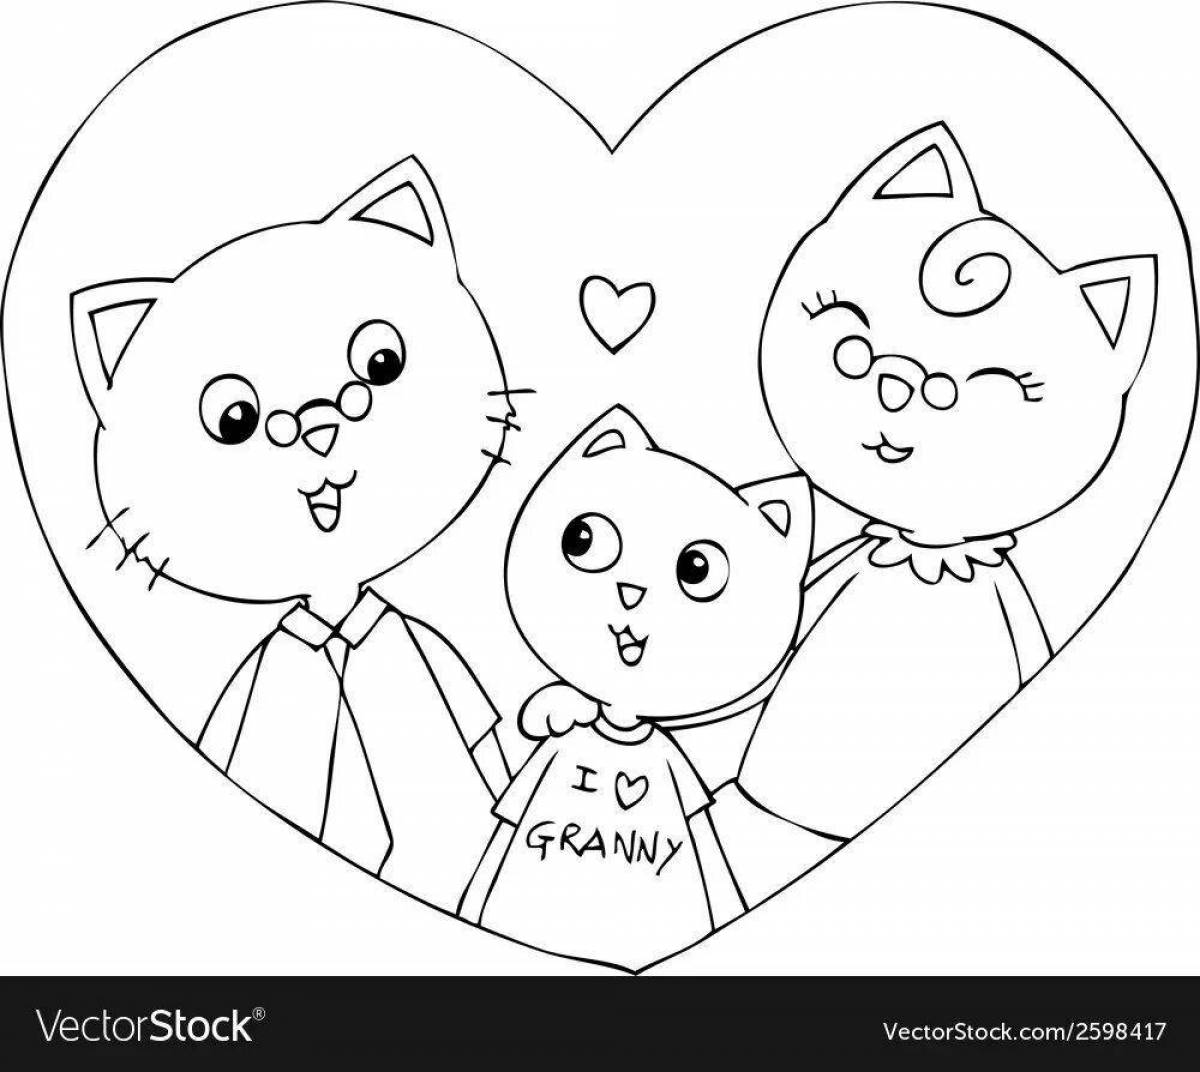 Adorable cat family coloring page